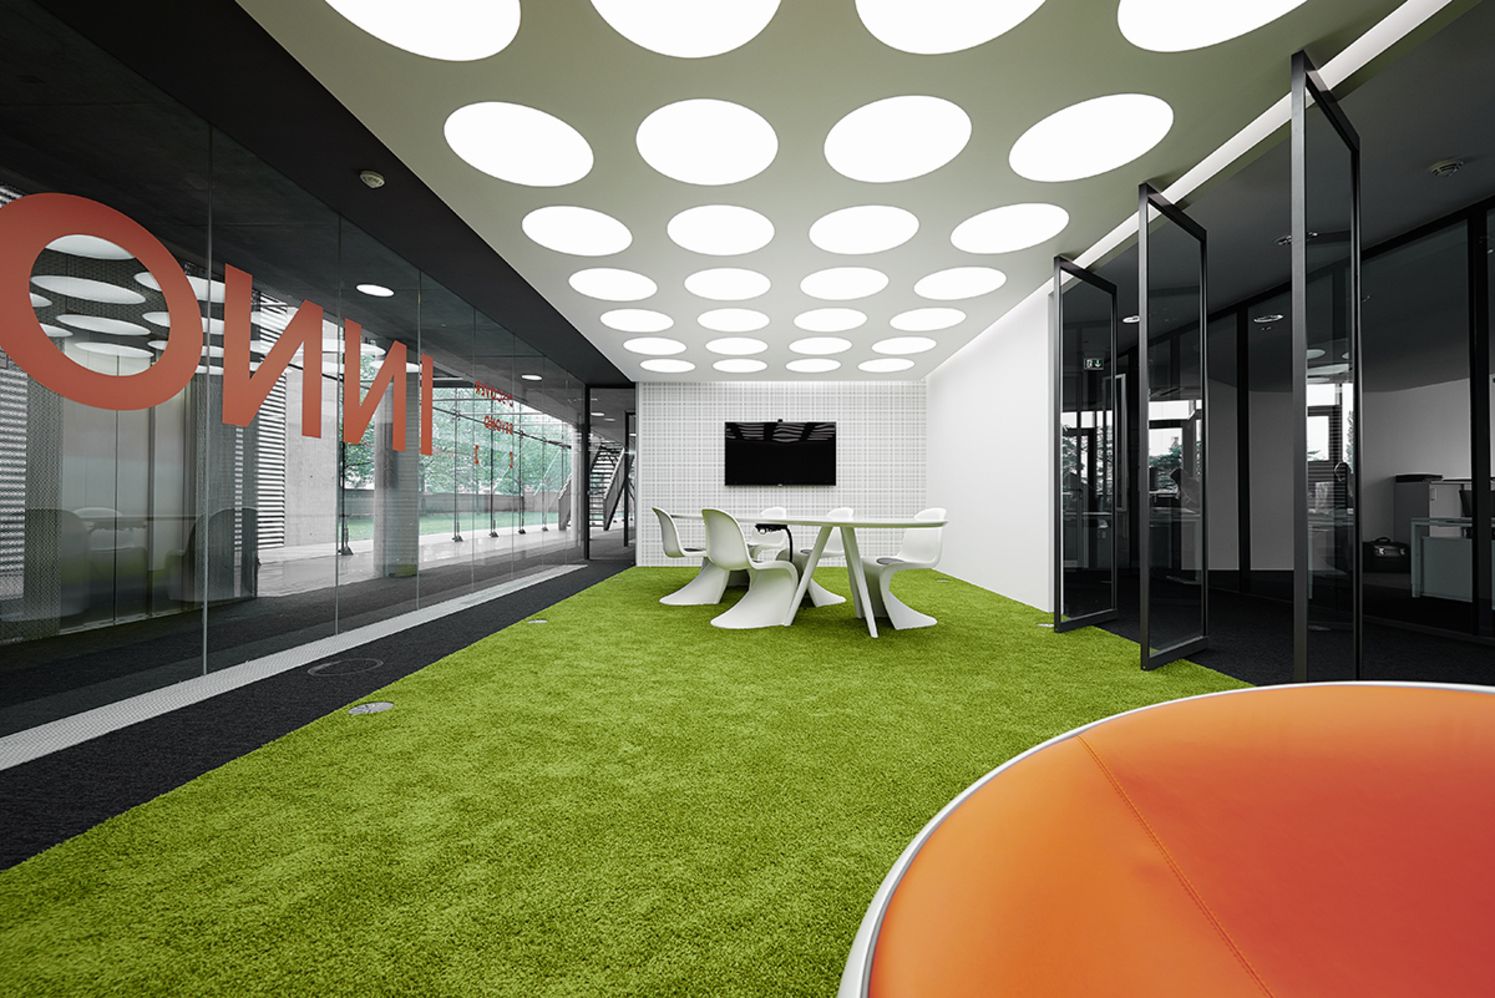 http://elonahome.com/wp-content/uploads/2020/12/Fashionable-modern-office-style-with-multiple-design-characters-for-different-work-zones-3.jpg